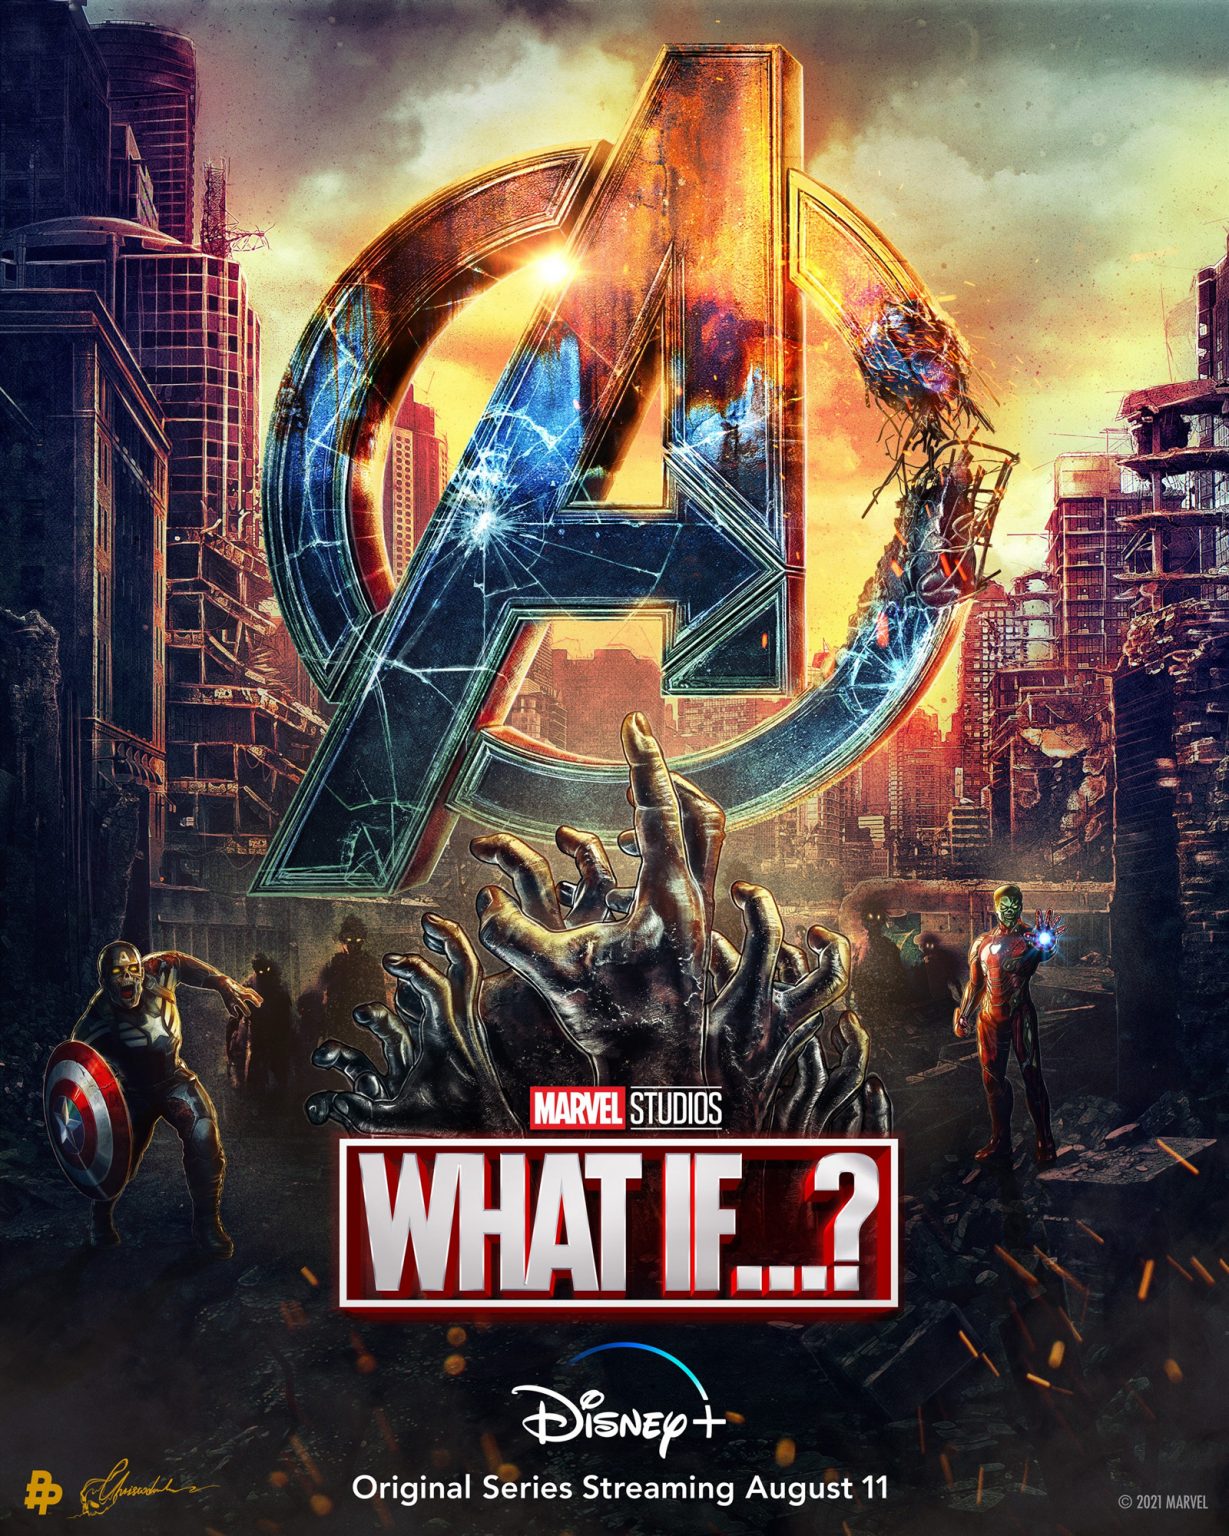 Marvel animated series “What If…?” reveals new poster FMV6